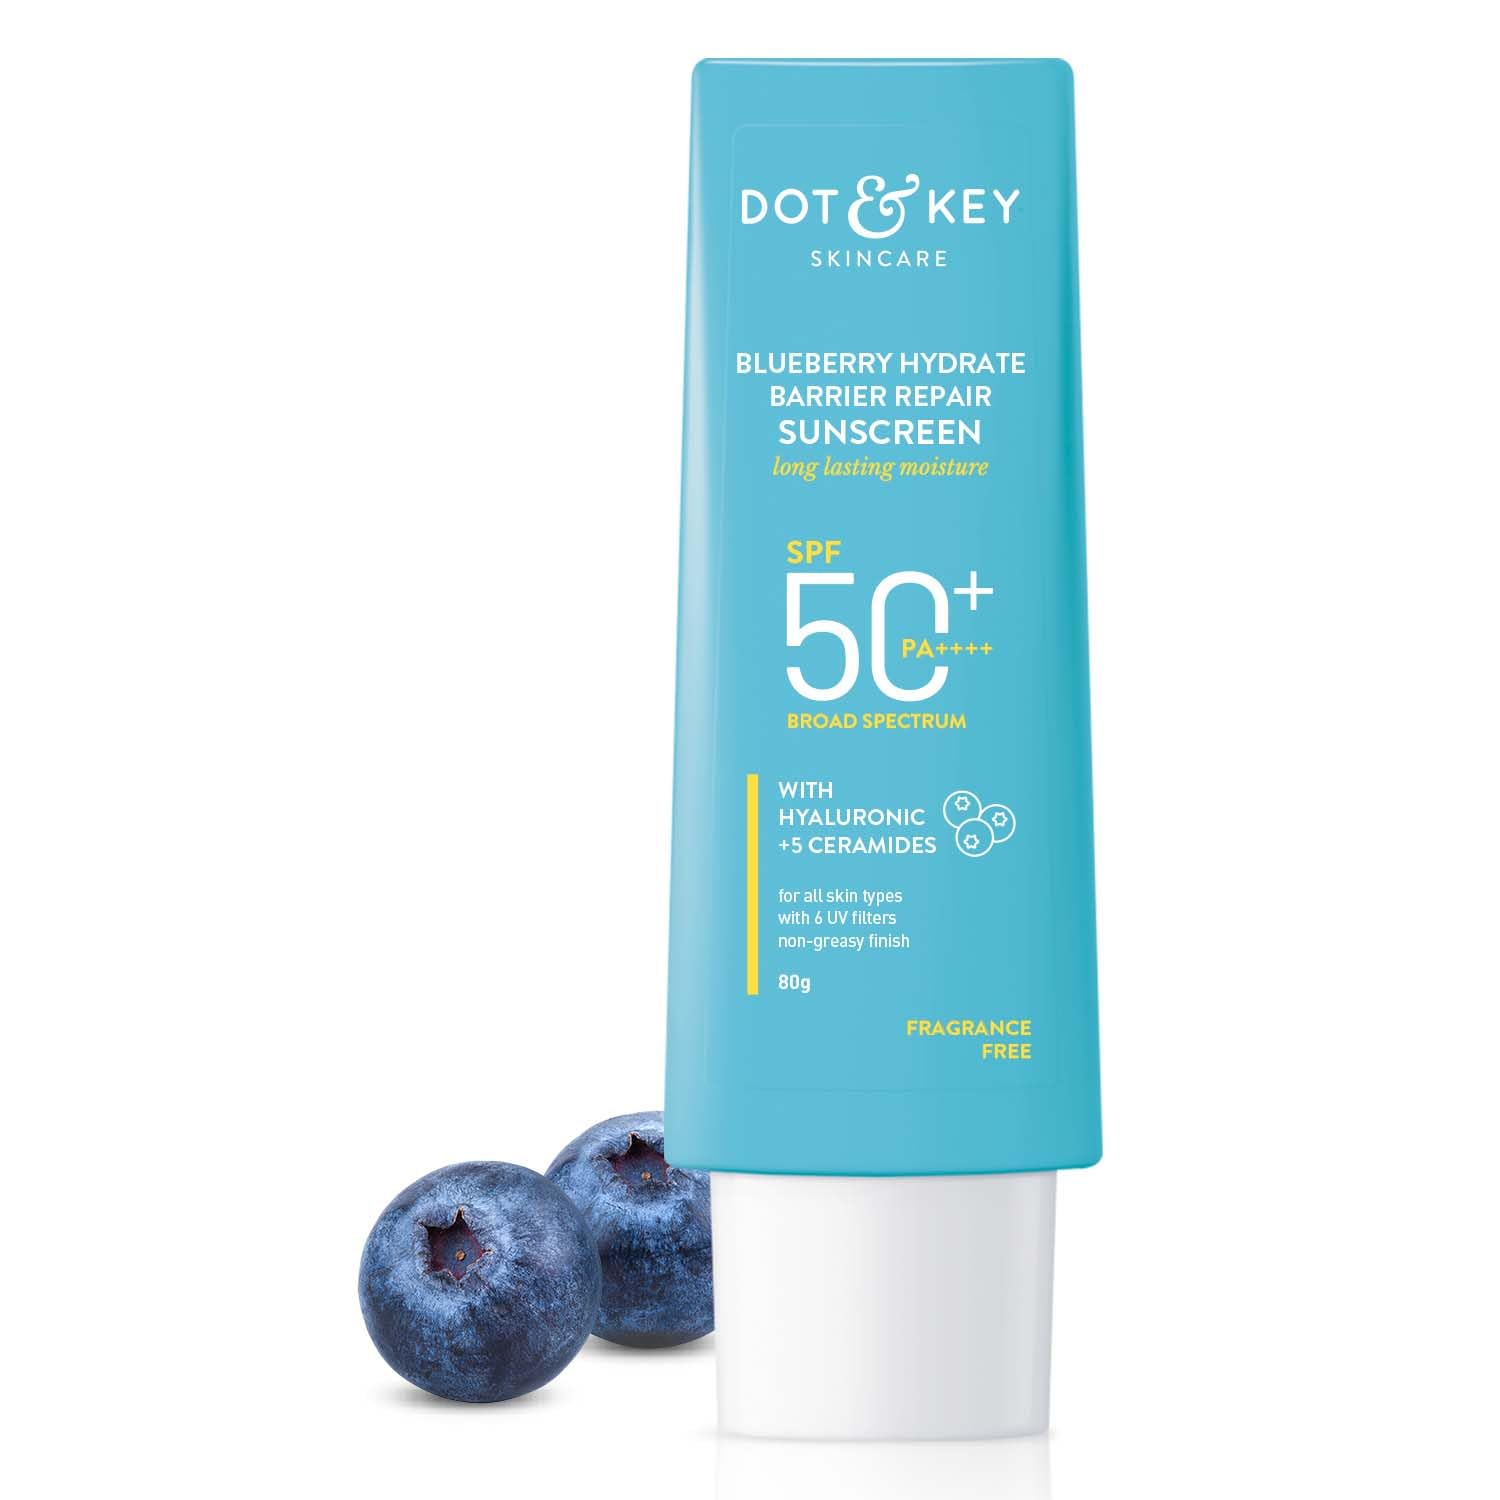 Product Review: Dot & Key Blueberry Hydrate Barrier Repair Sunscreen SPF 50+ For Dry & Sensitive Skin